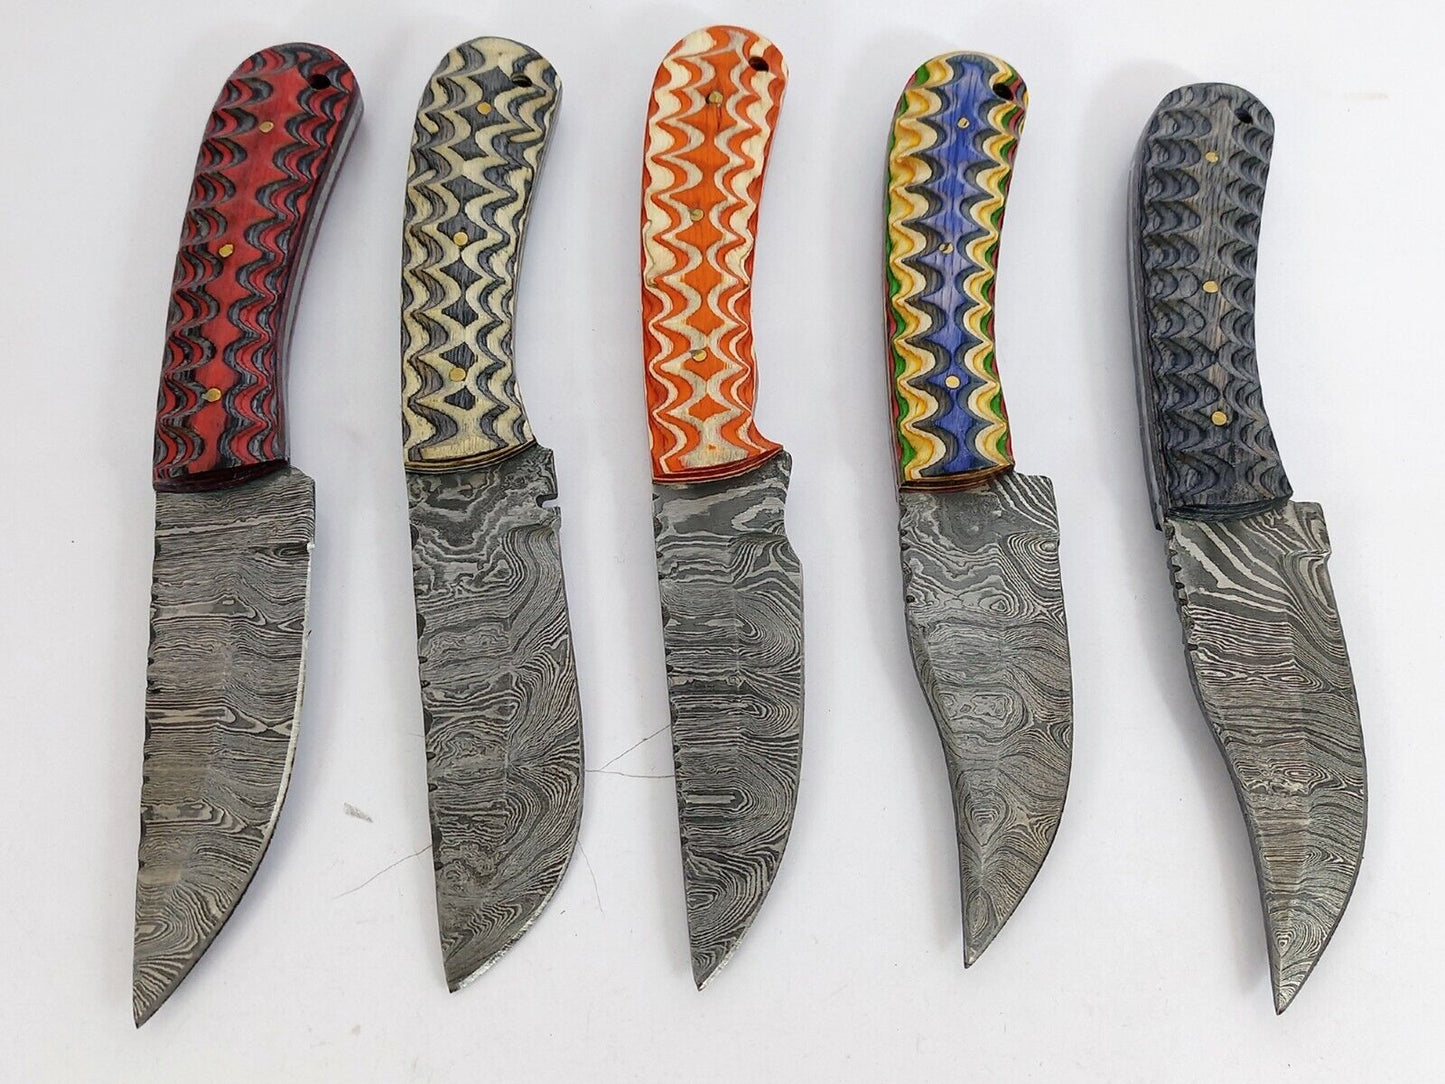 10 pieces Damascus steel fixed blade skinning knives lot with Leather sheath. Over 80 inches long Damascus steel knives in assorted colors